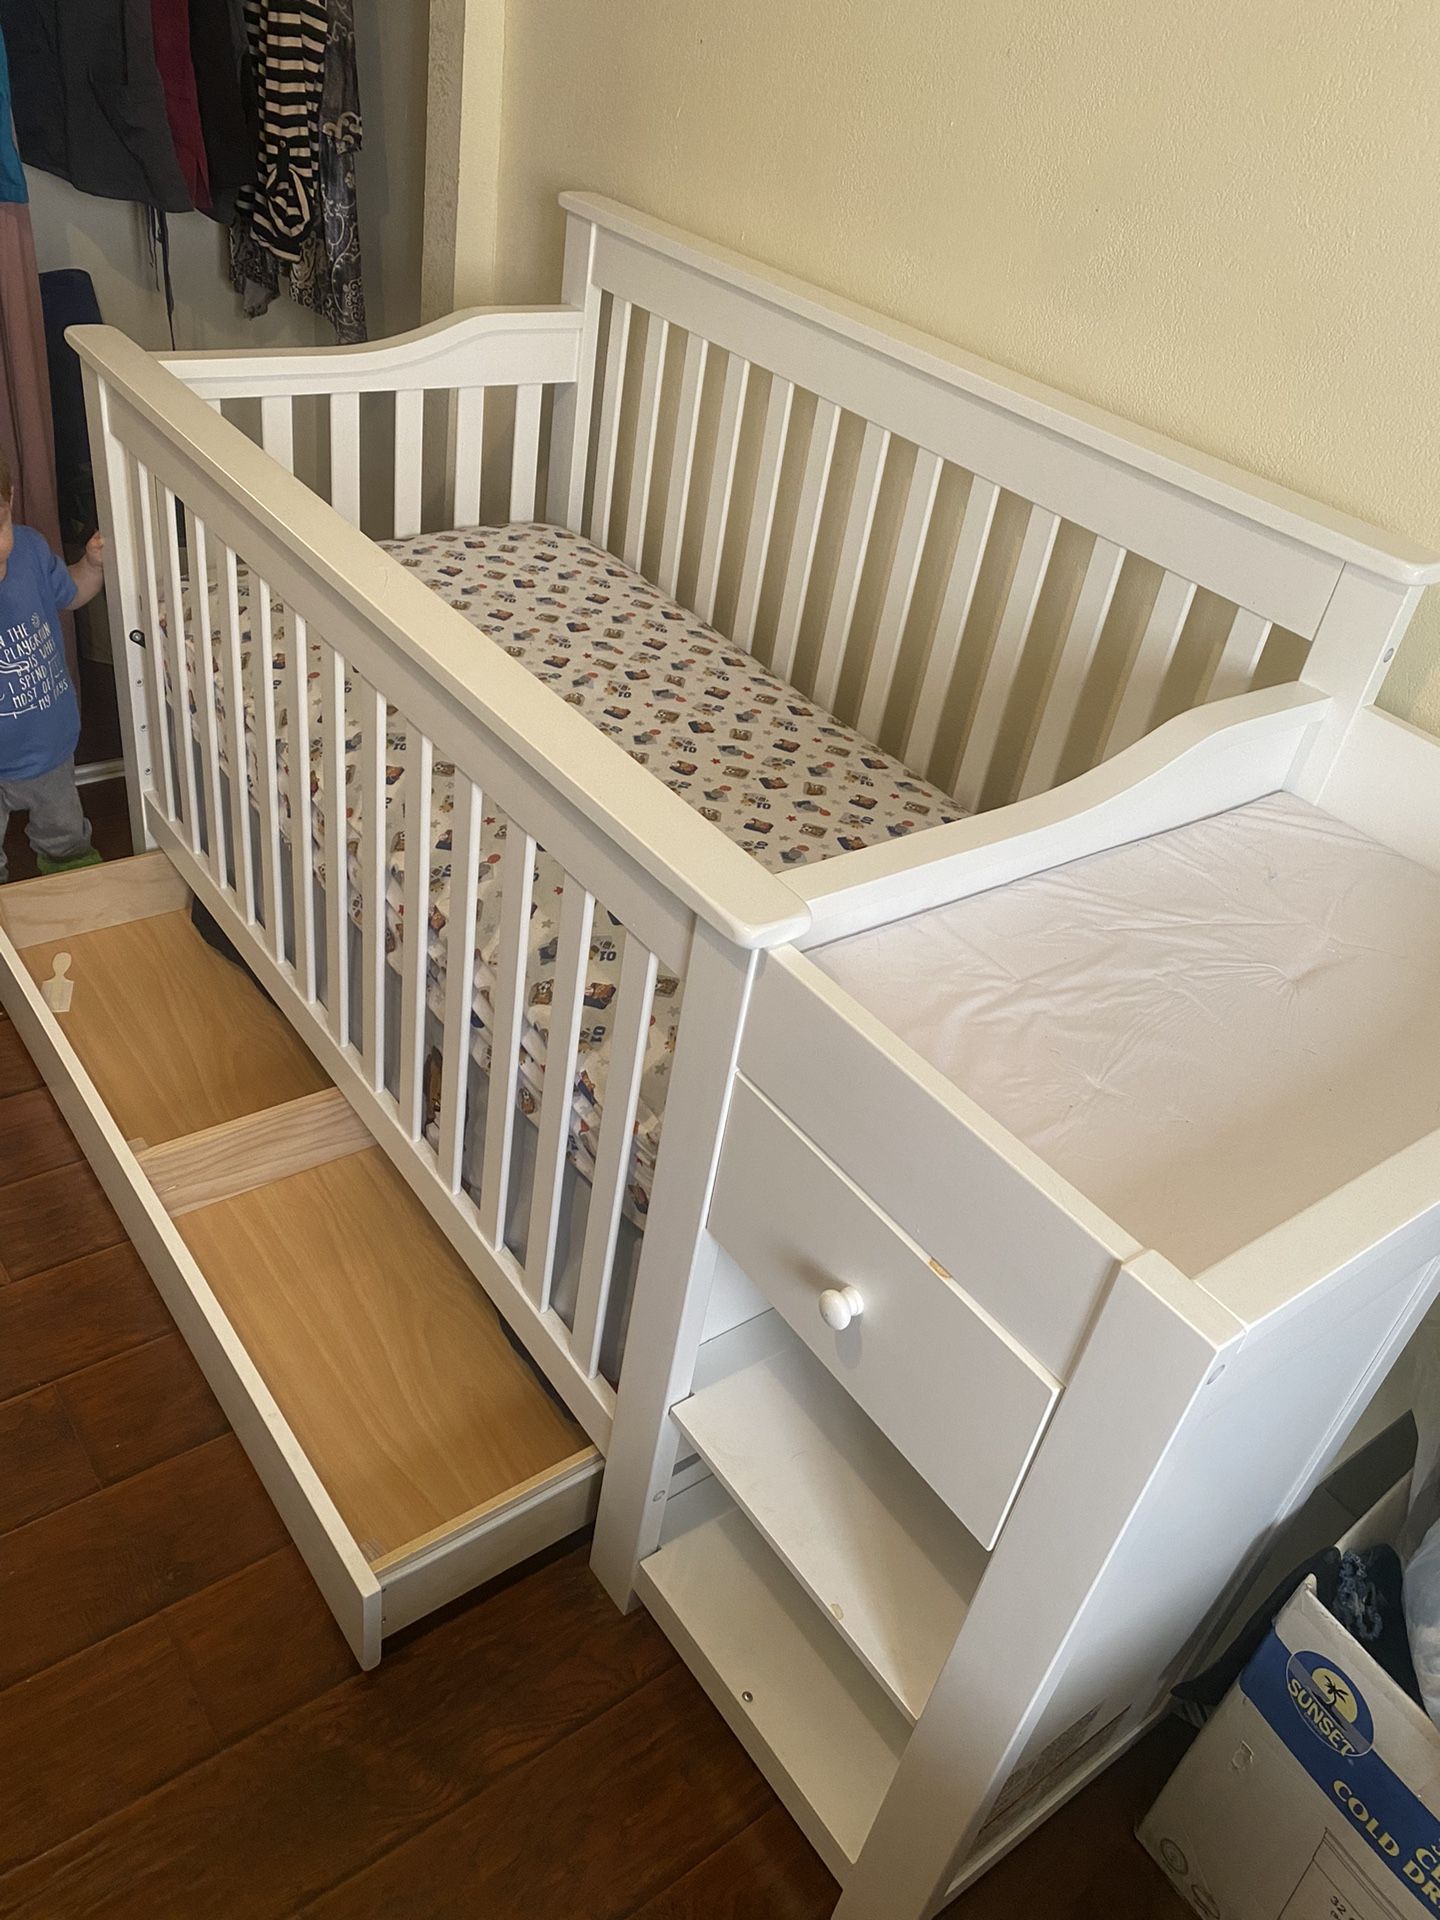 Brand New Crib/ Toddler Twin Bed